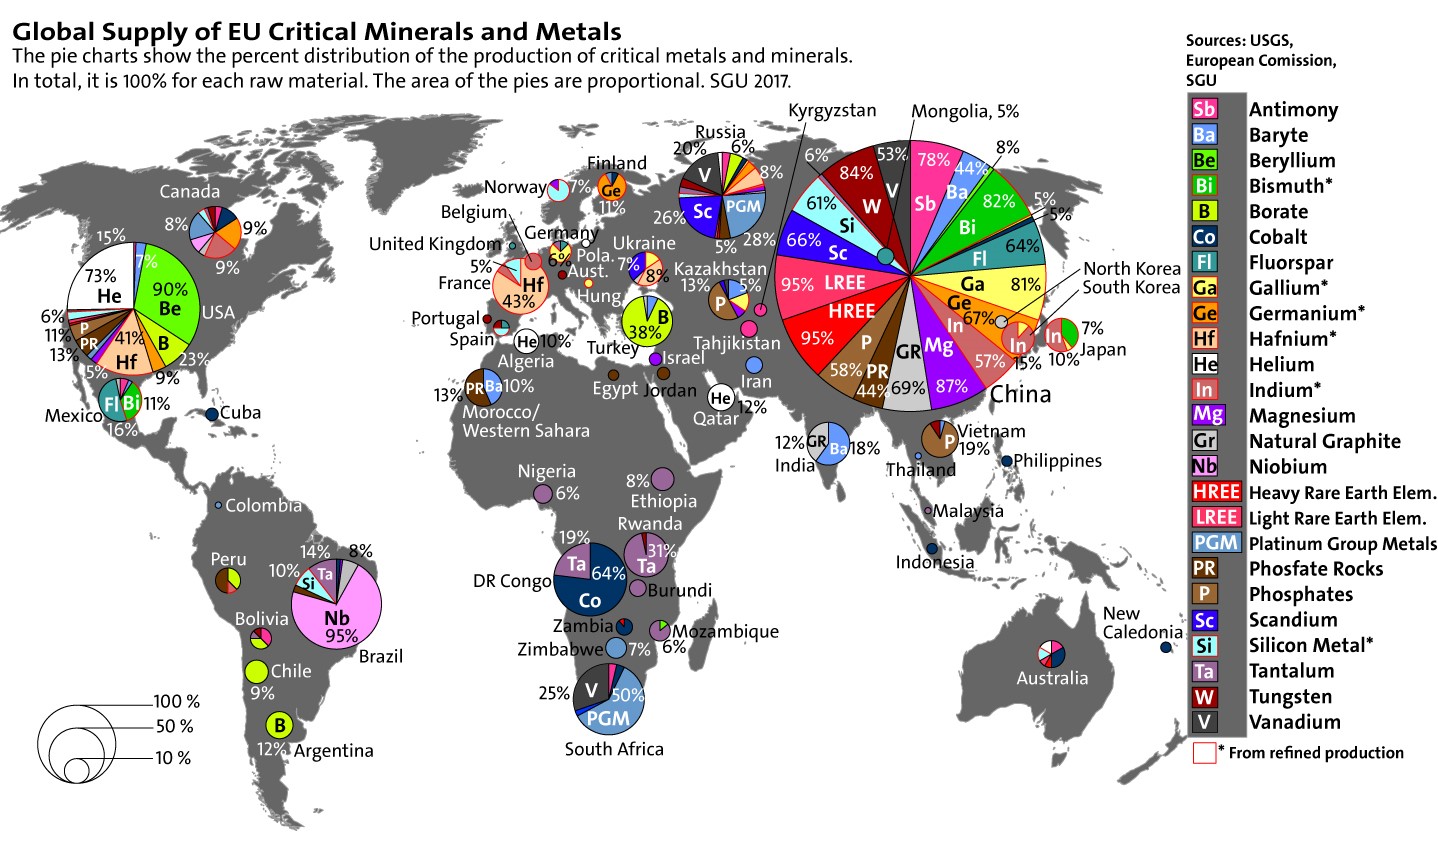 Global Supply of Critical Minerals and Metals